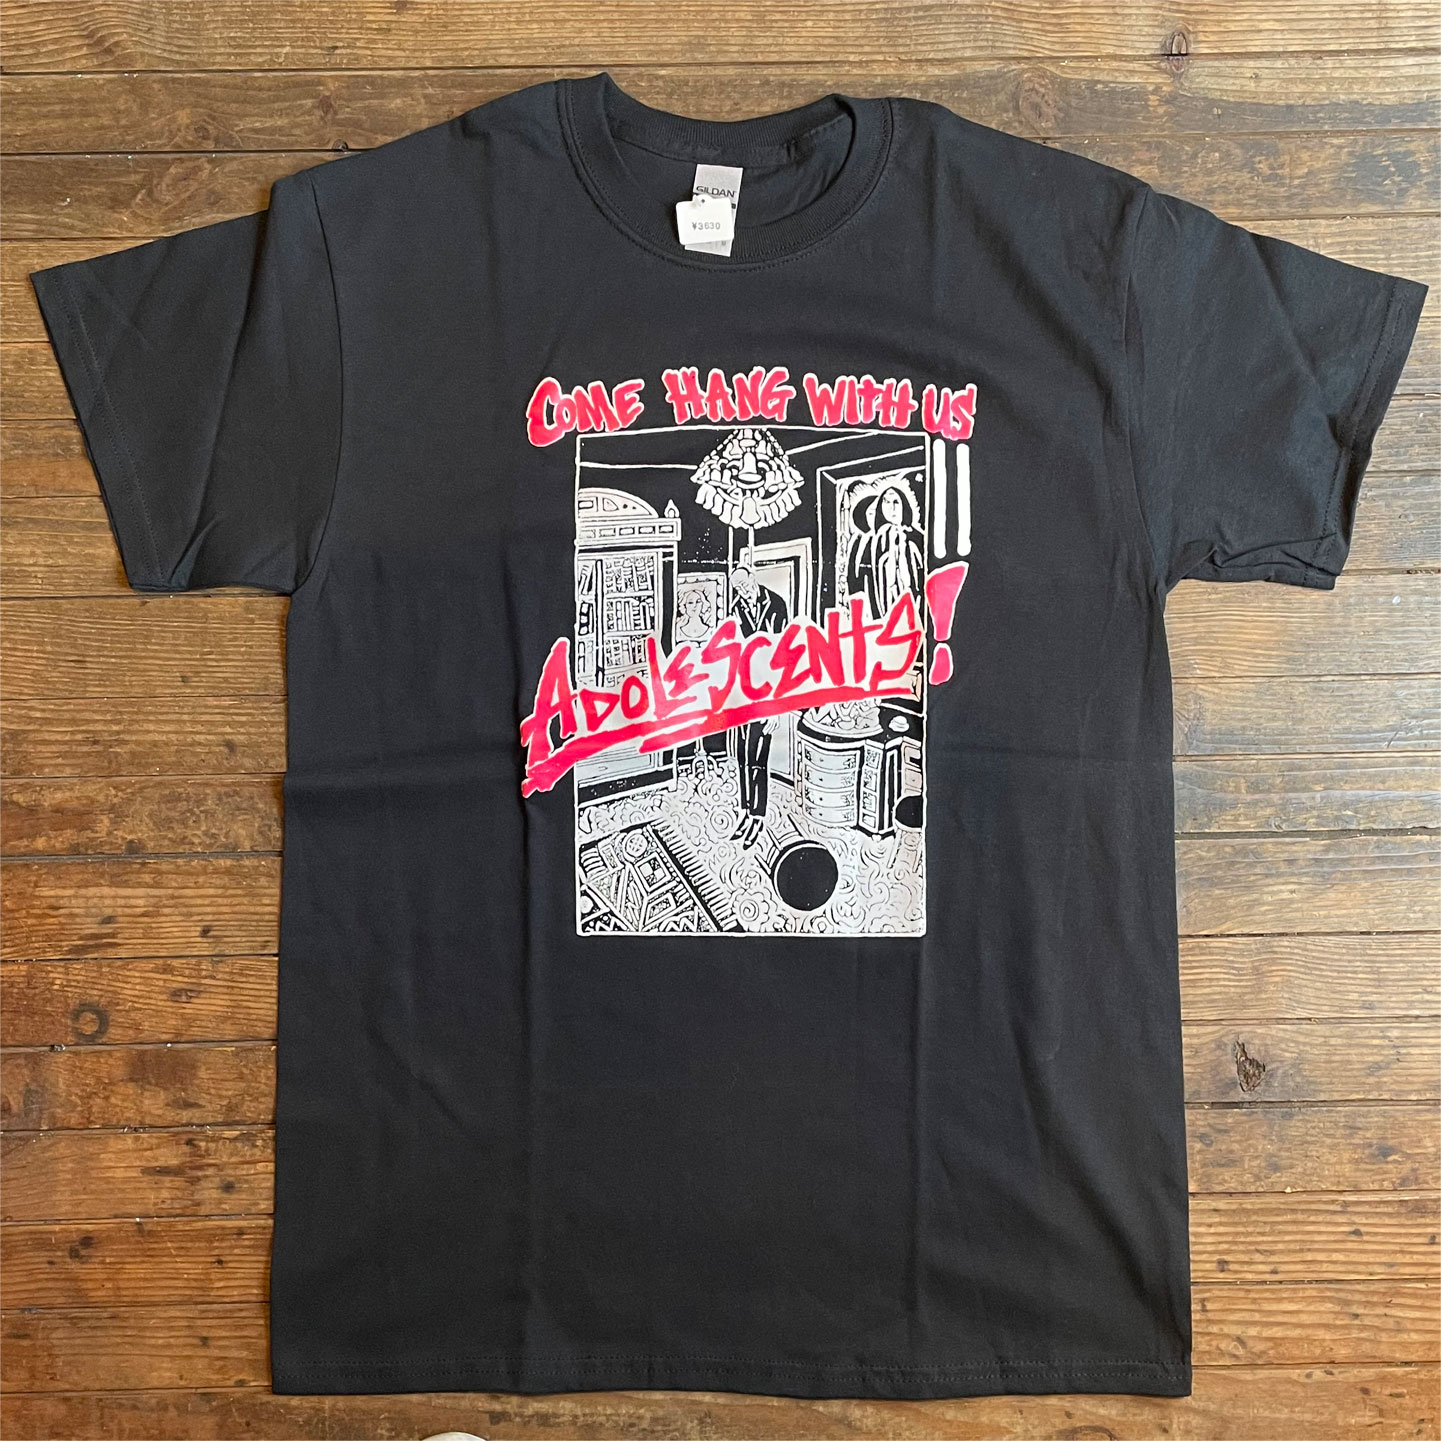 ADOLESCENTS Tシャツ COME HANG WITH US